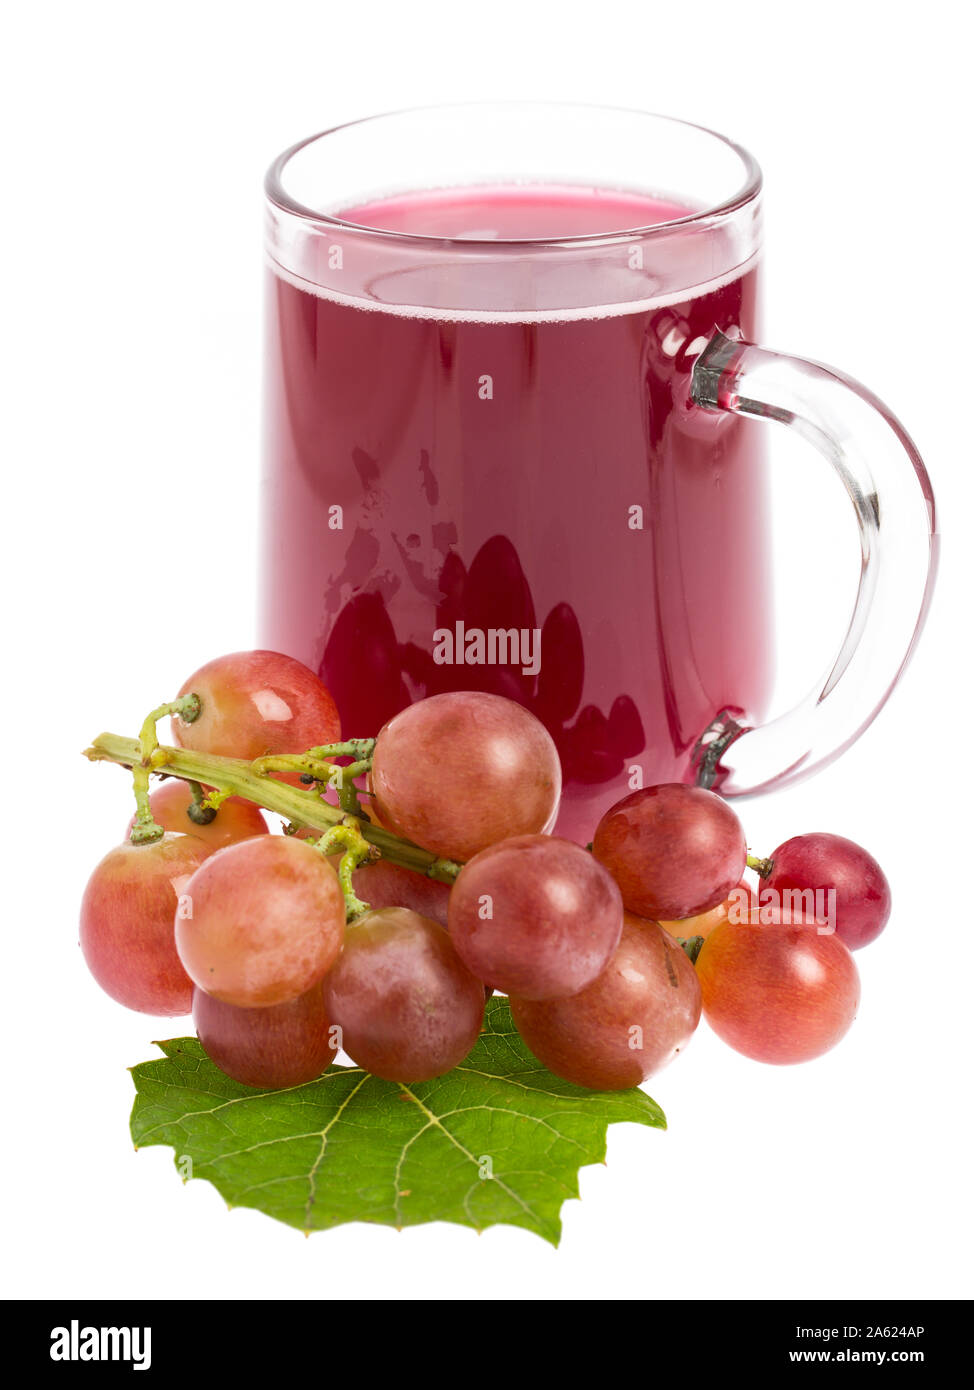 'Sturm': Wine decorated with grapes Stock Photo